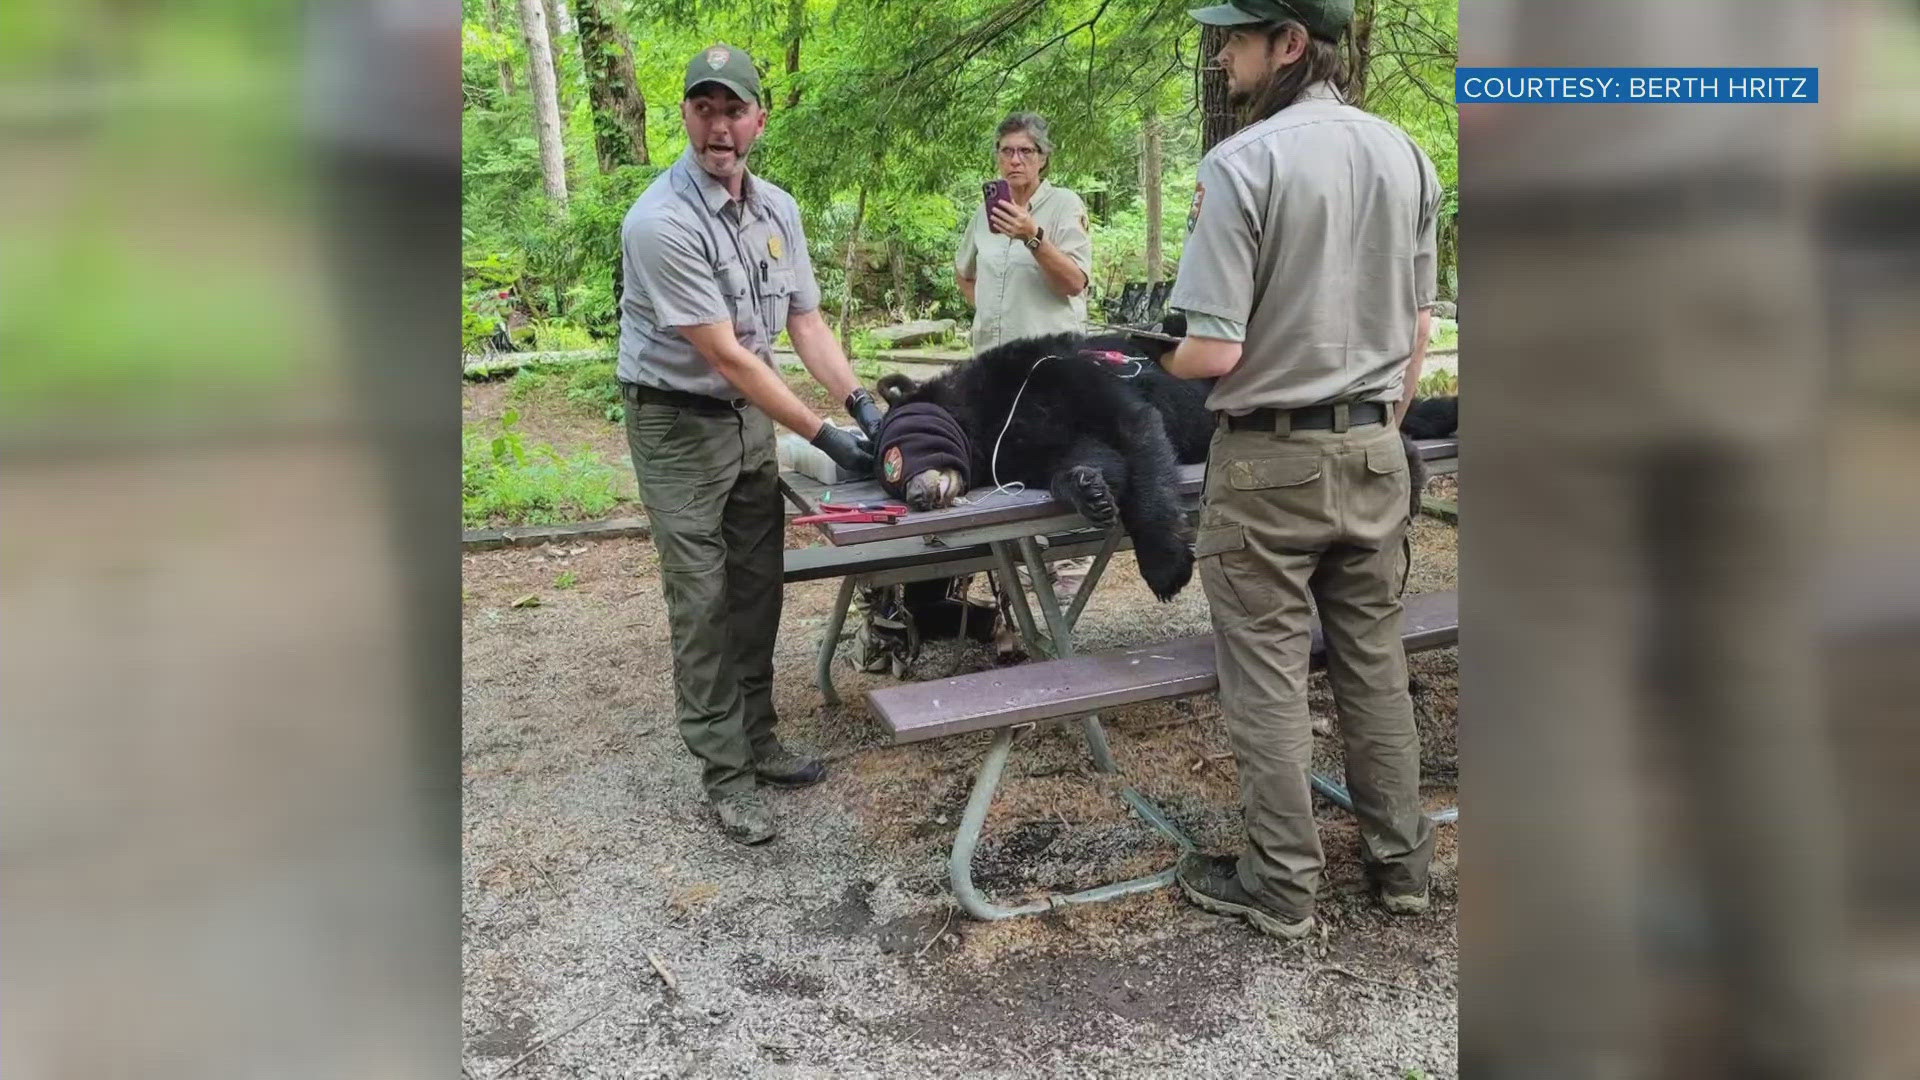 A medical ranger allowed a handful of people to see how the tranquilized bear was processed with an ear tag, chip and tattoo before it was released.